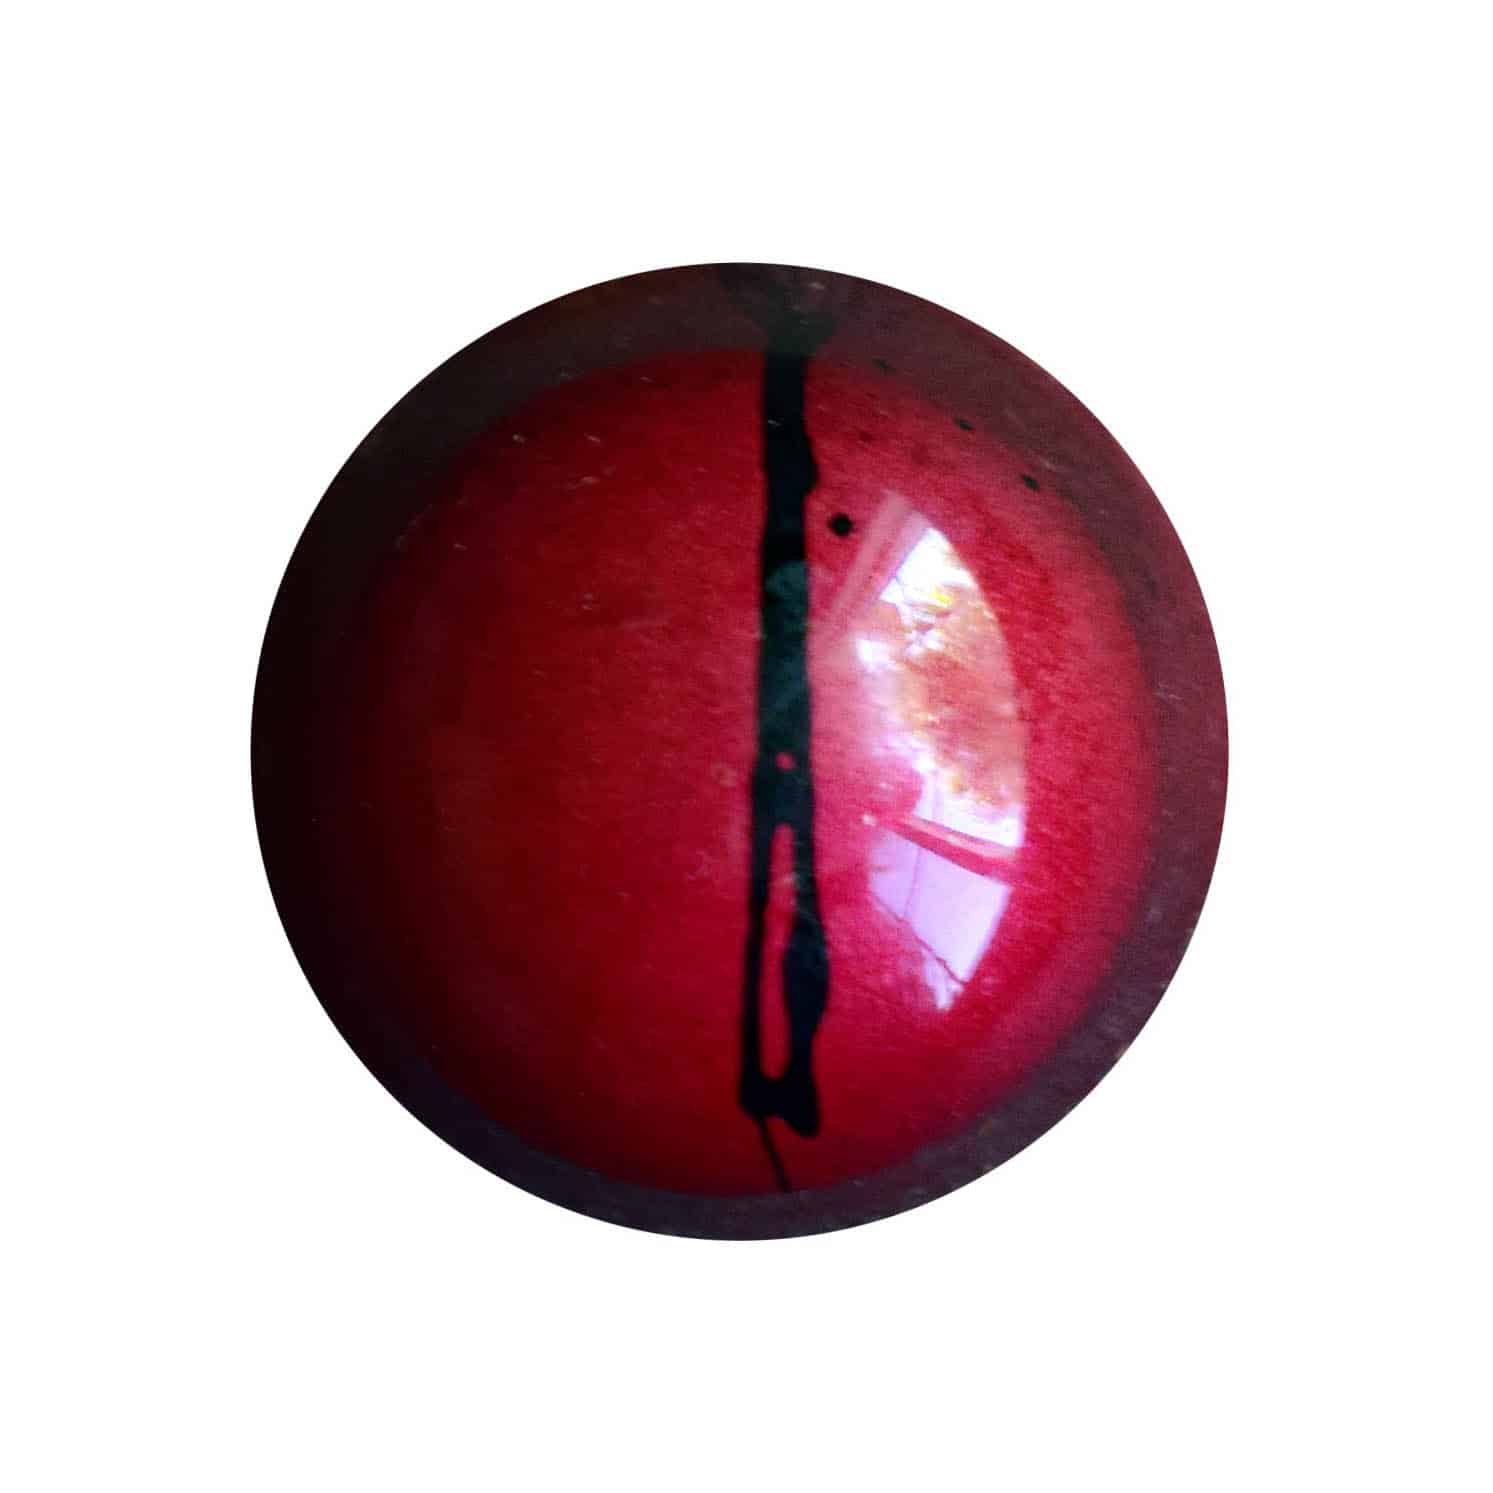 Overhead view of a red gourmet chocolate truffle with a black dotted line that is off-center; the truffle tastes like strawberry and balsamic